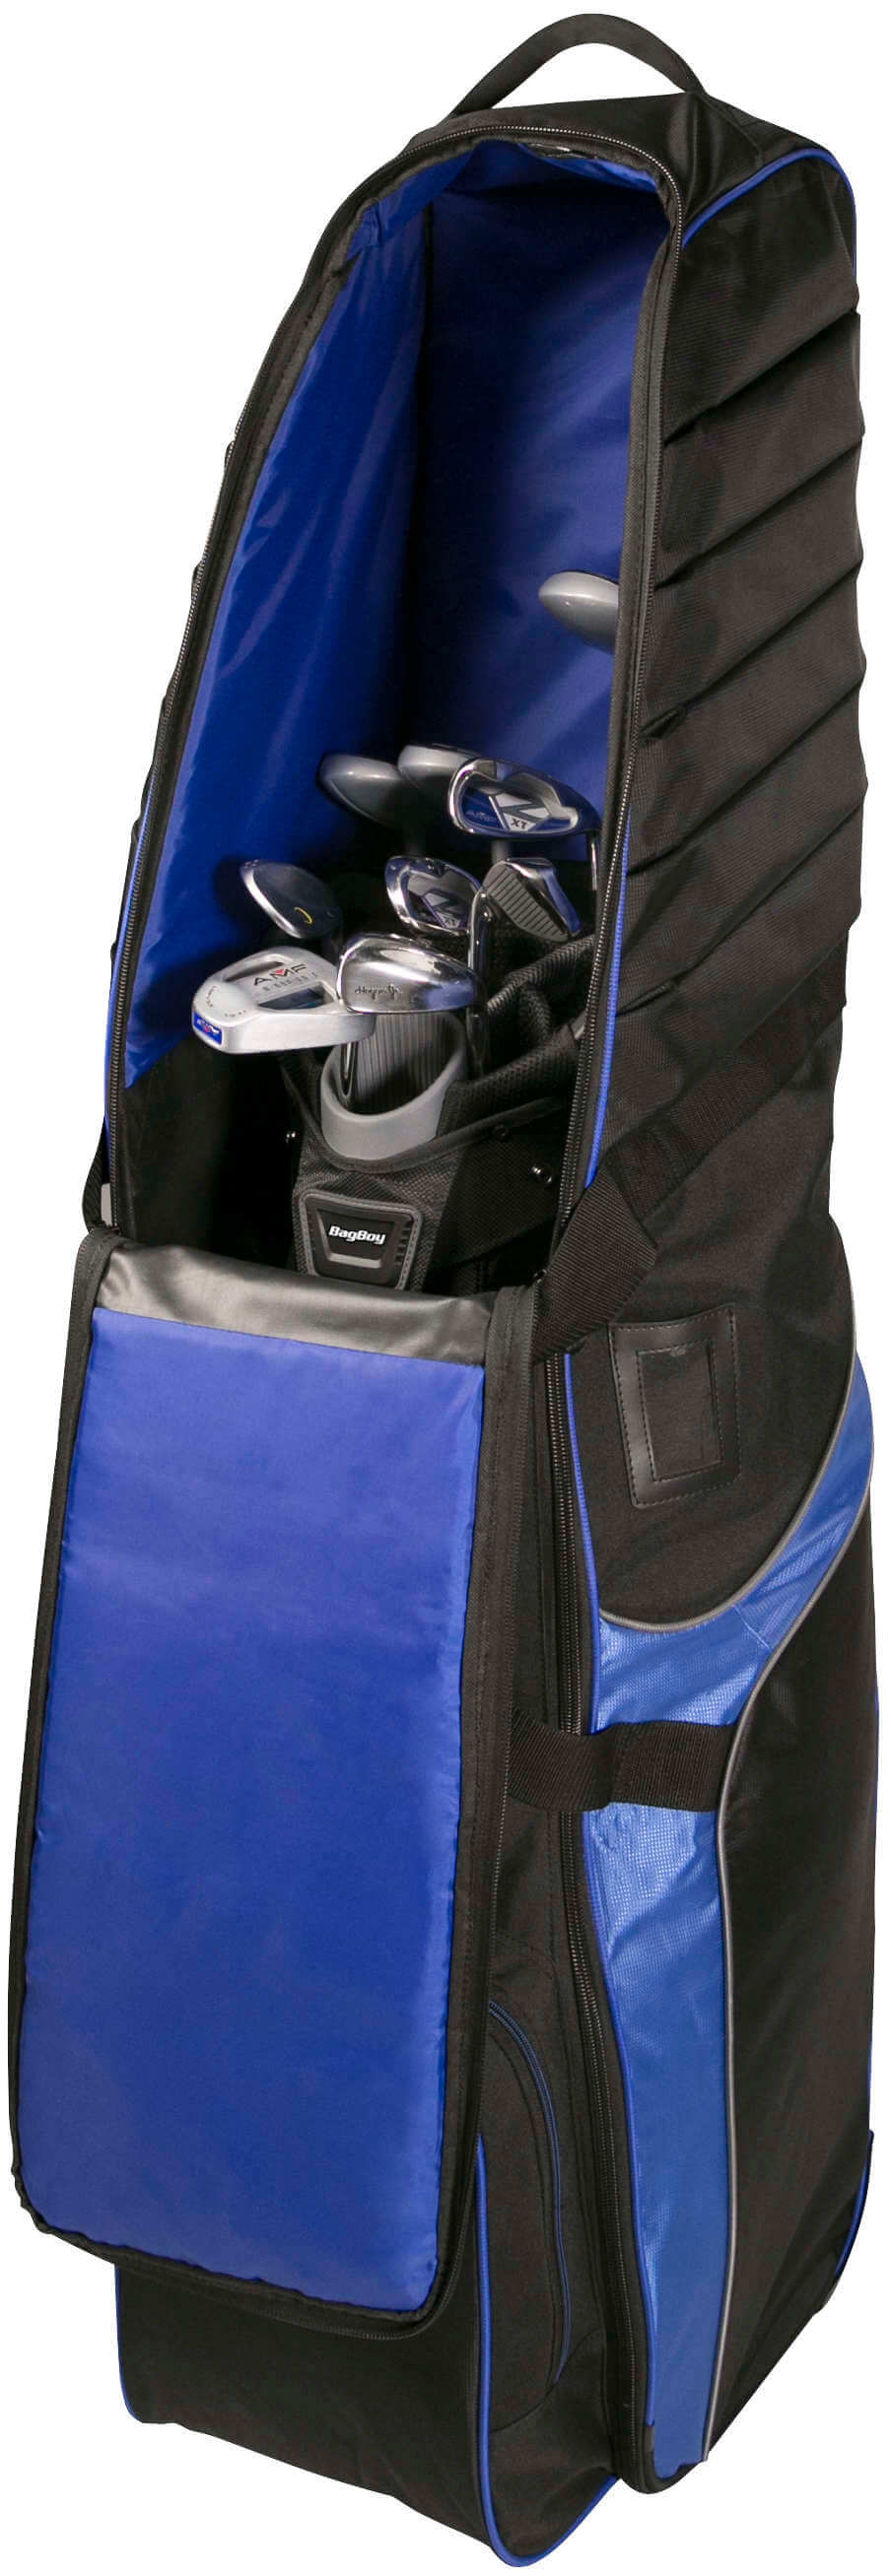 BagBoy T750 Wheeled Travel Cover